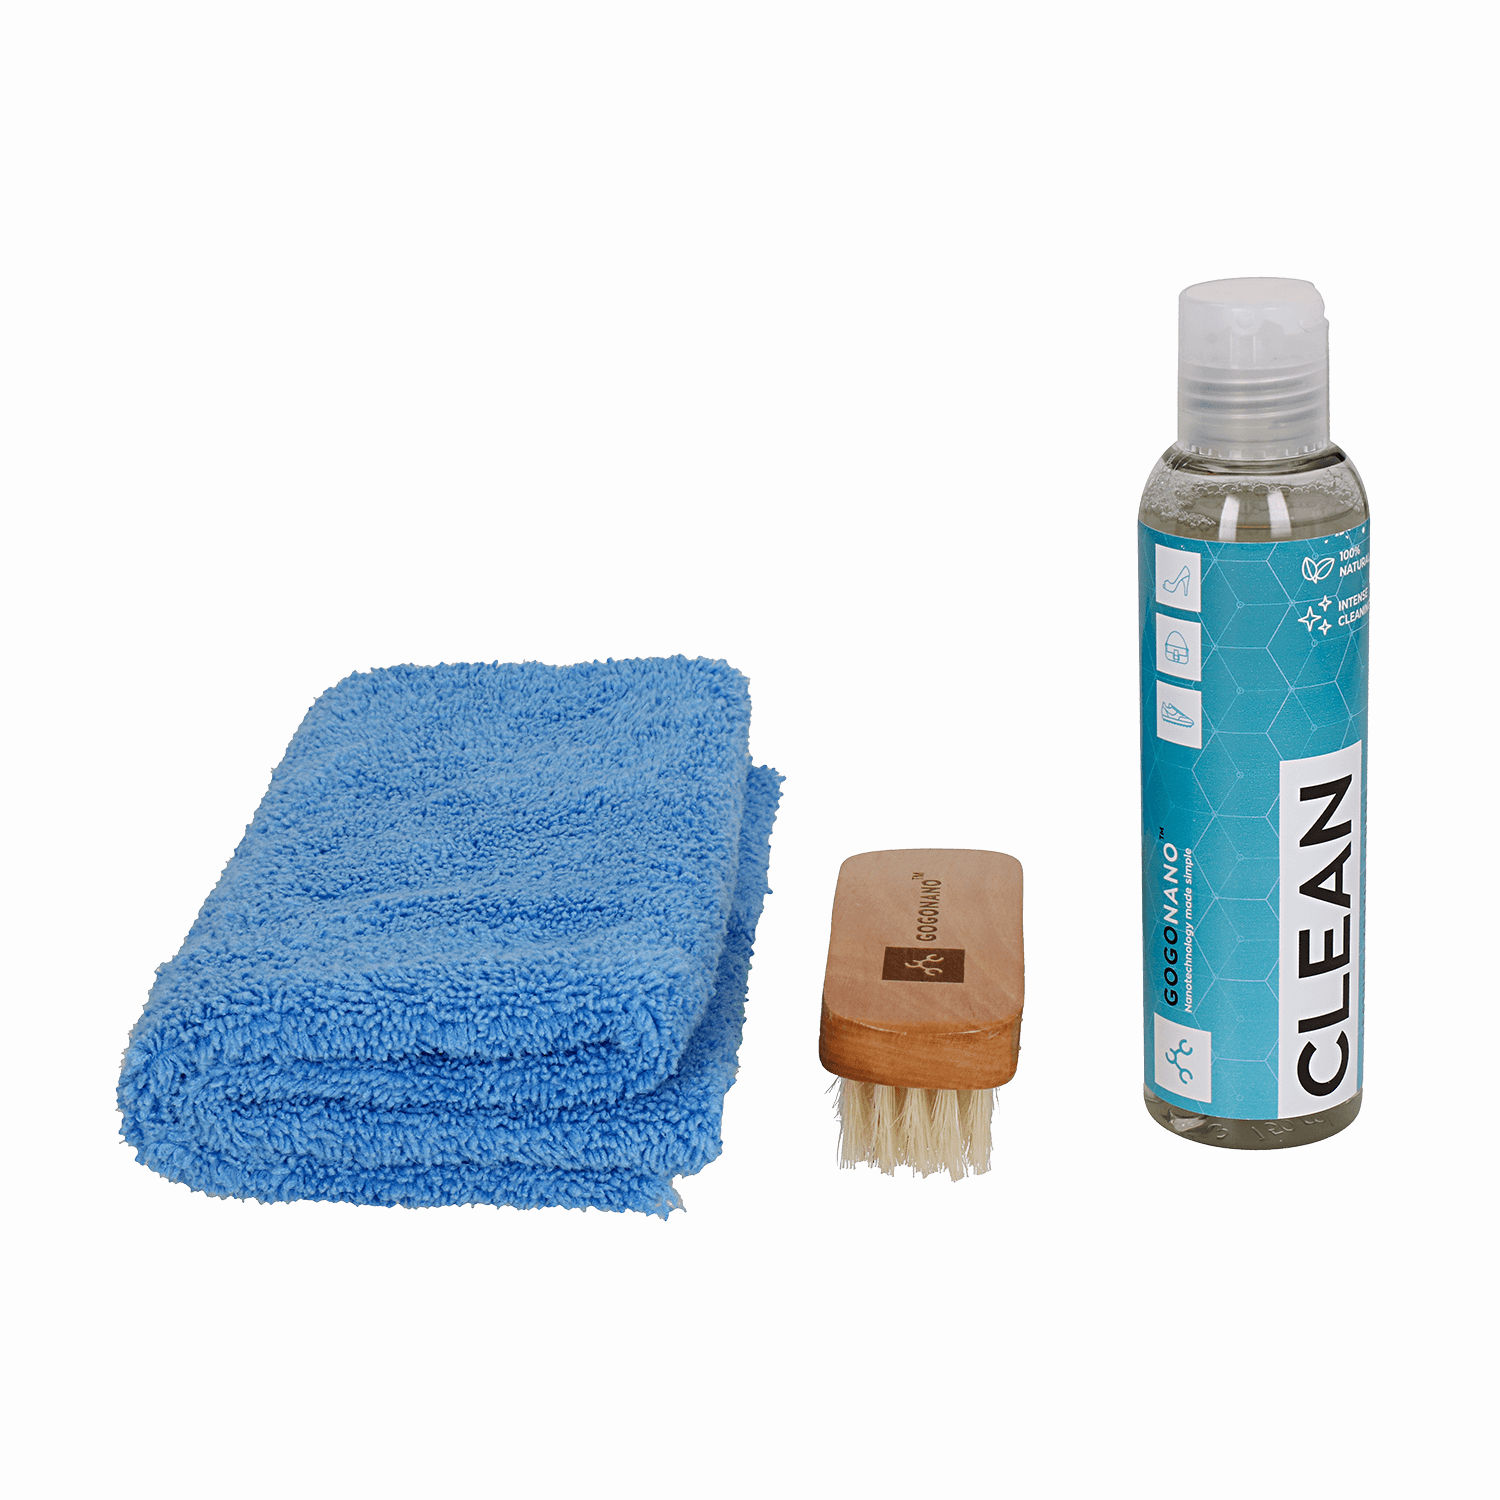 GoGoNano universal eco-friendly cleaner kit for fashion and footwear